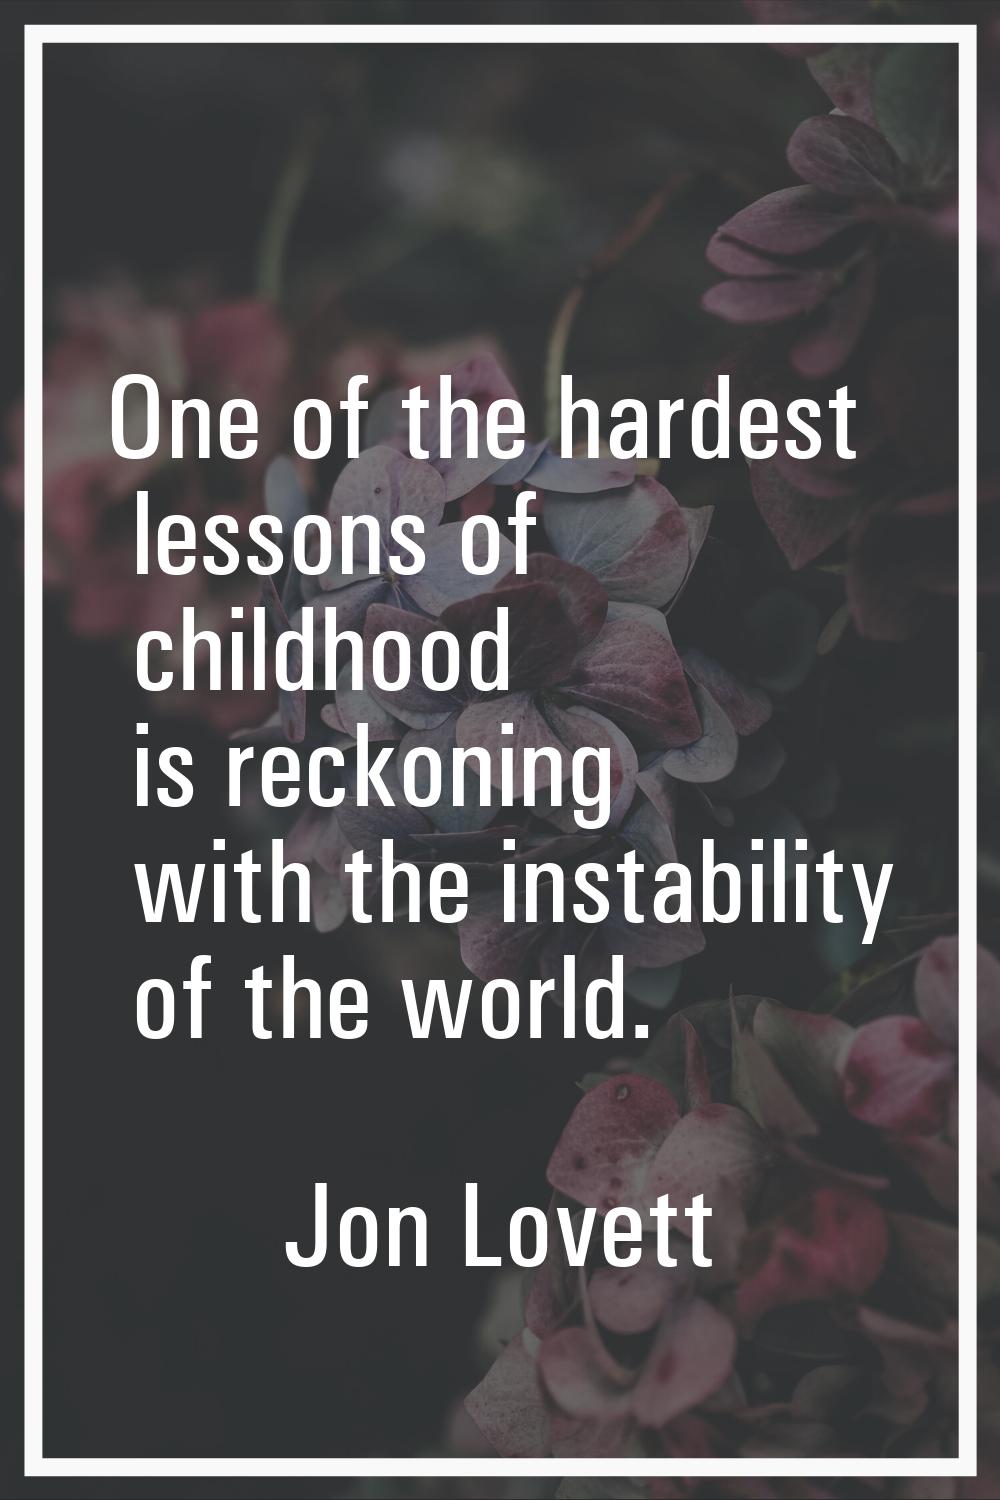 One of the hardest lessons of childhood is reckoning with the instability of the world.